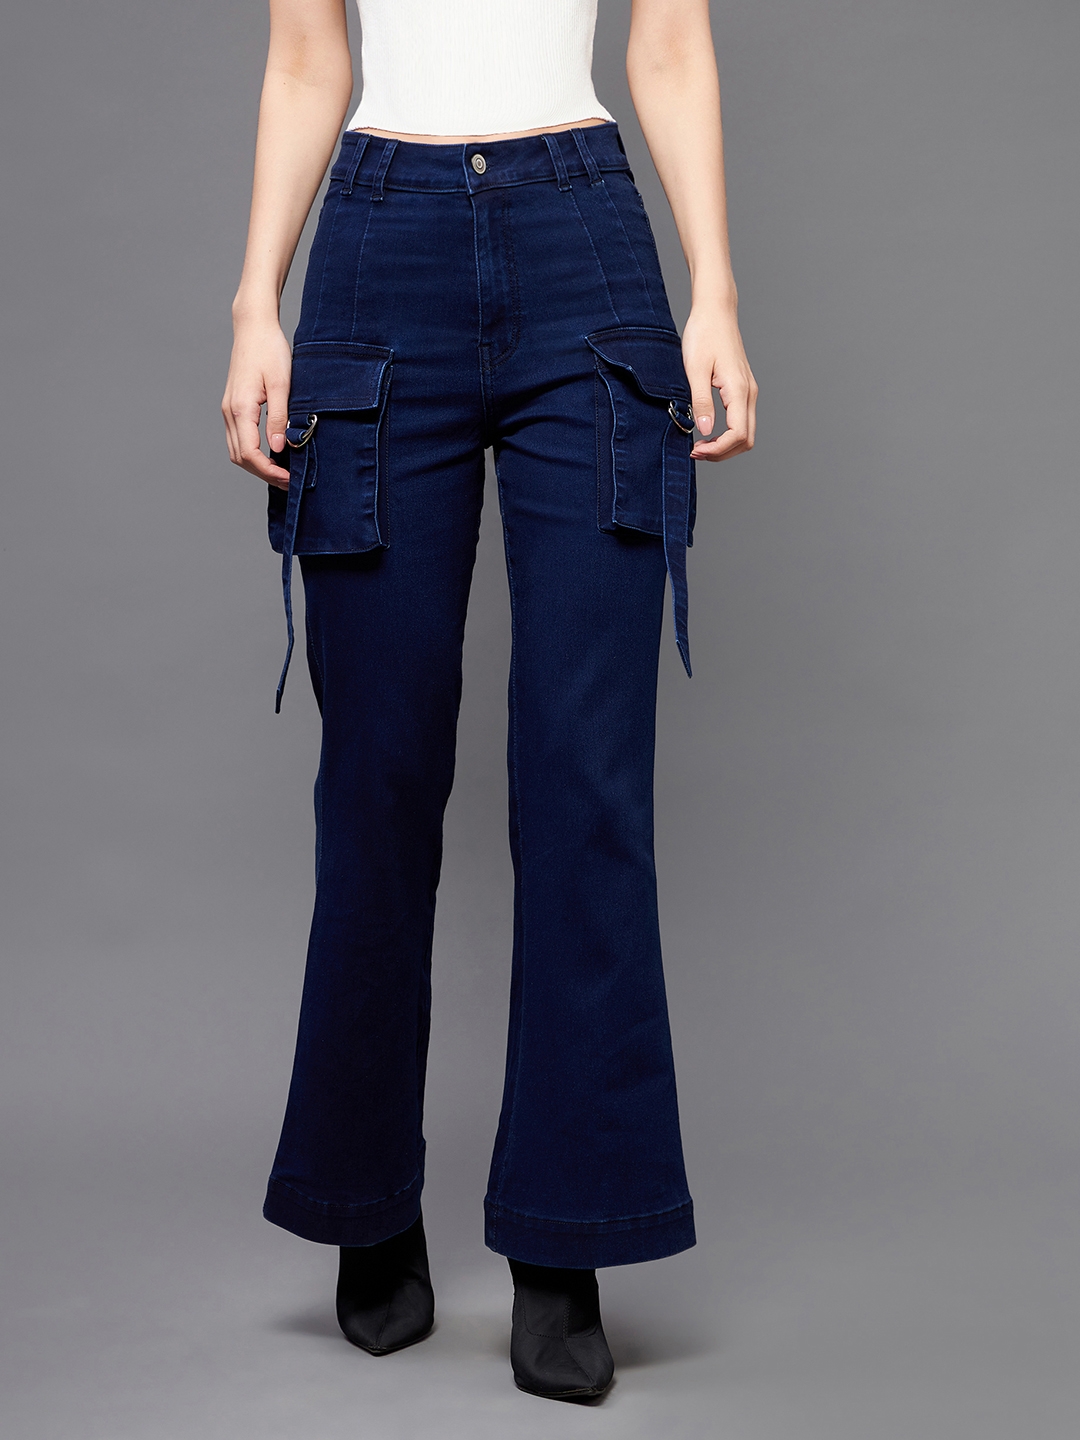 Bootcut Jeans  Buy Bootcut Jeans online in India